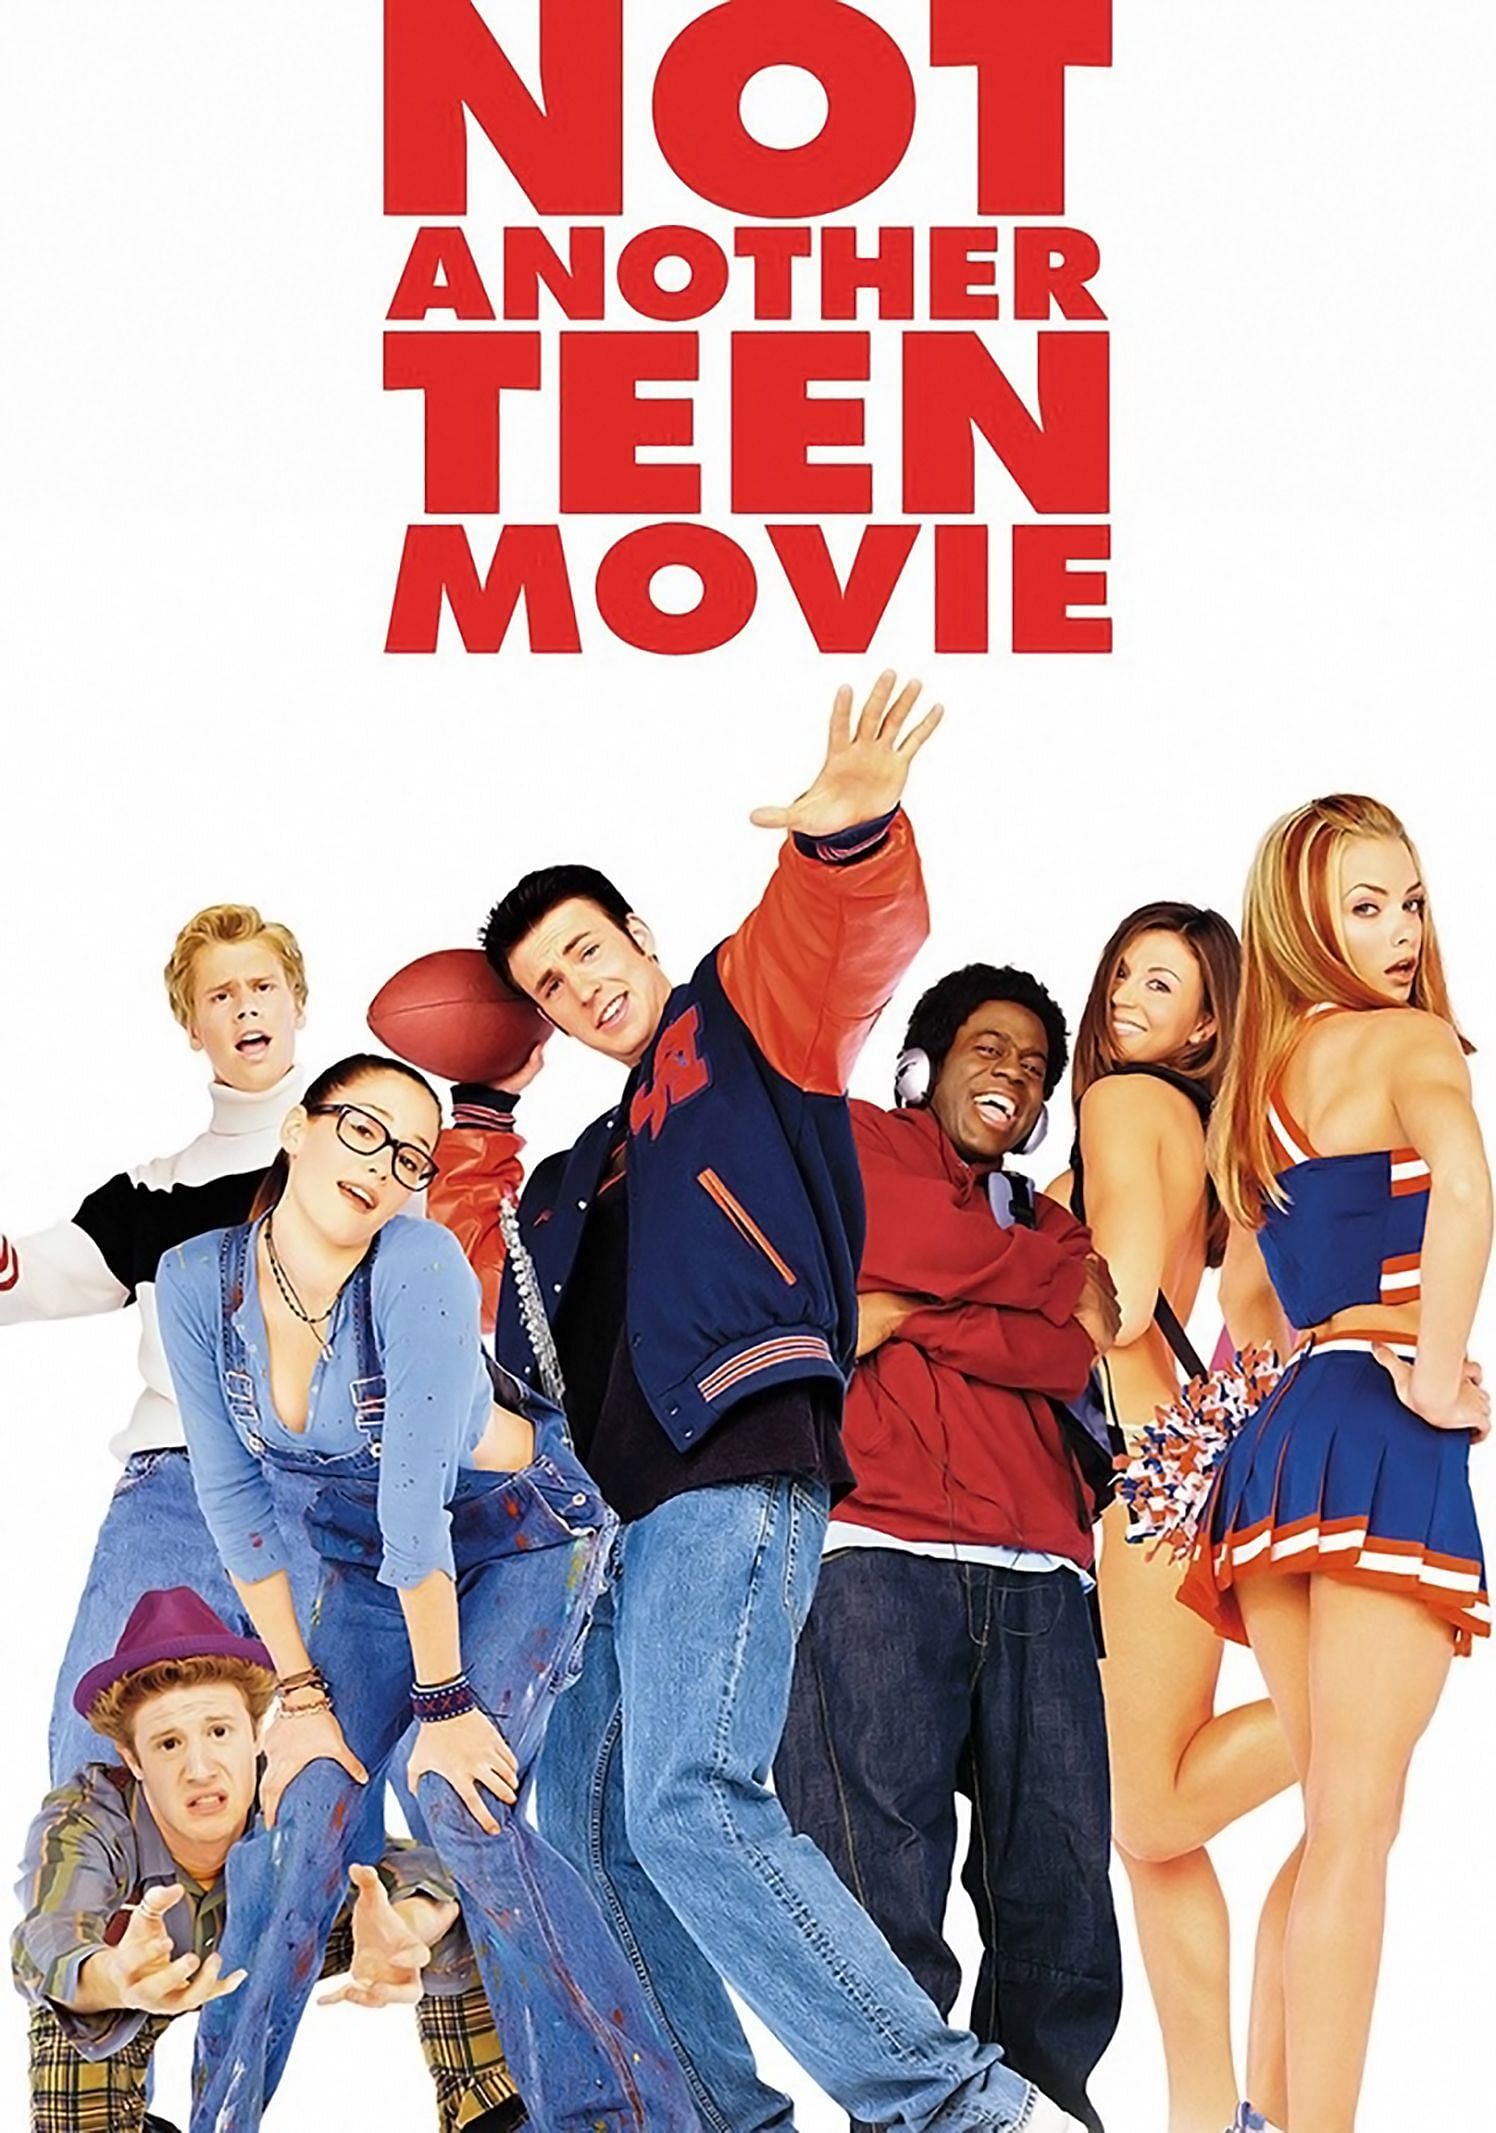 Not Another Teen Movie, 2001 (Image via Columbia Pictures)